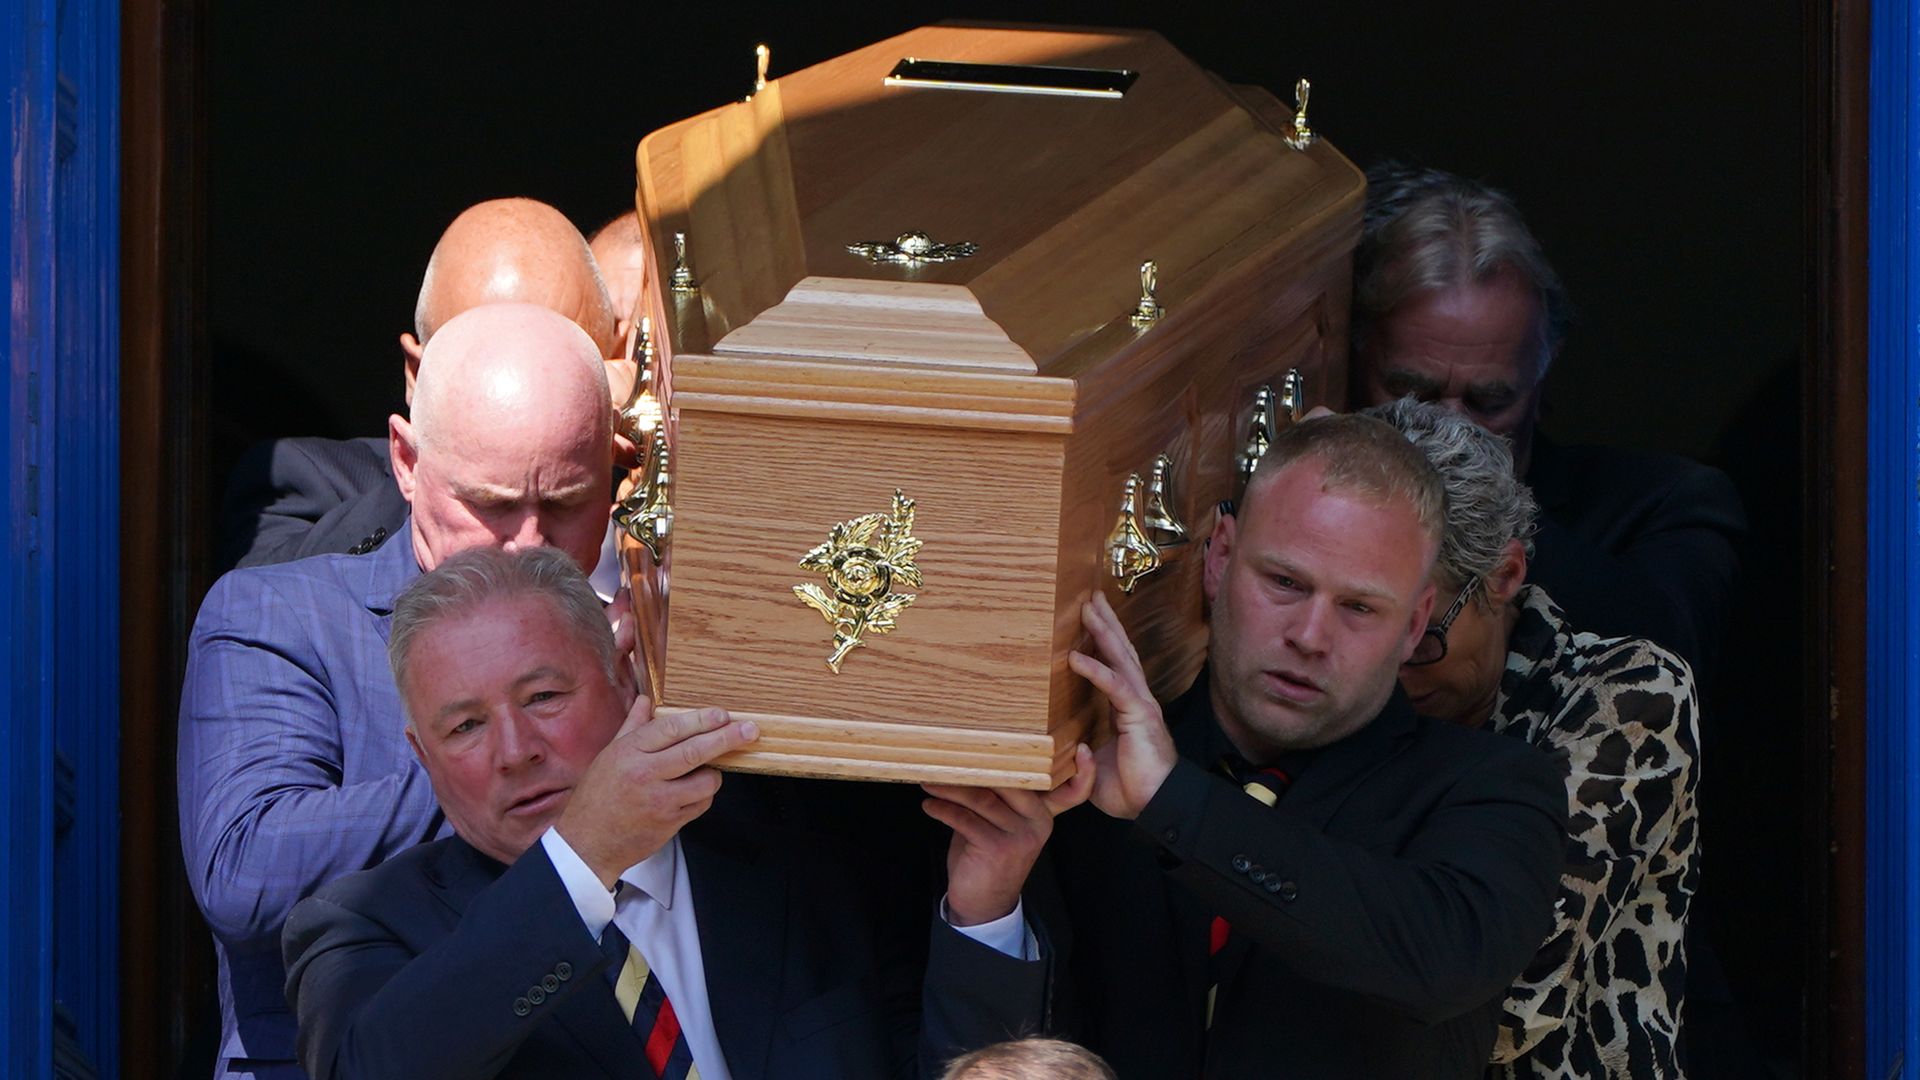 'A one off' - Goram remembered at unique funeral